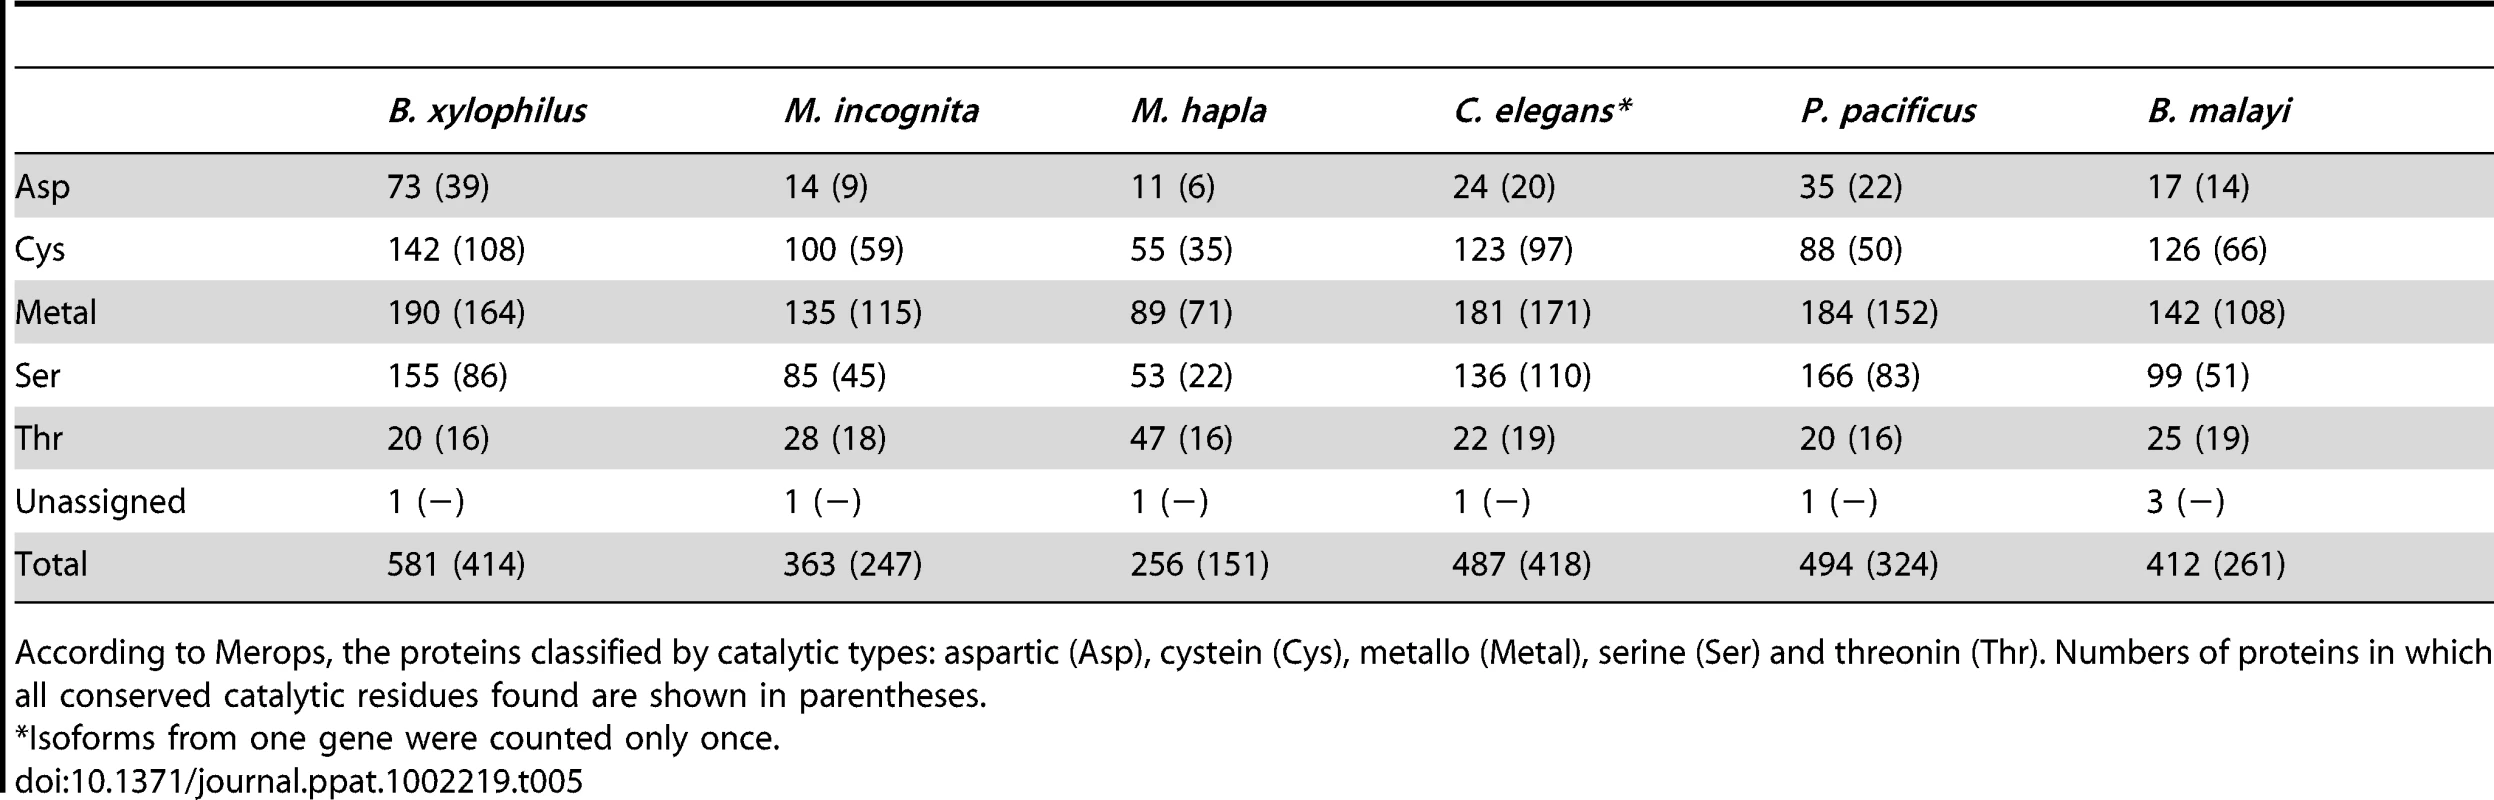 Summary of peptidases in <i>B. xylophilus</i> and other nematodes.